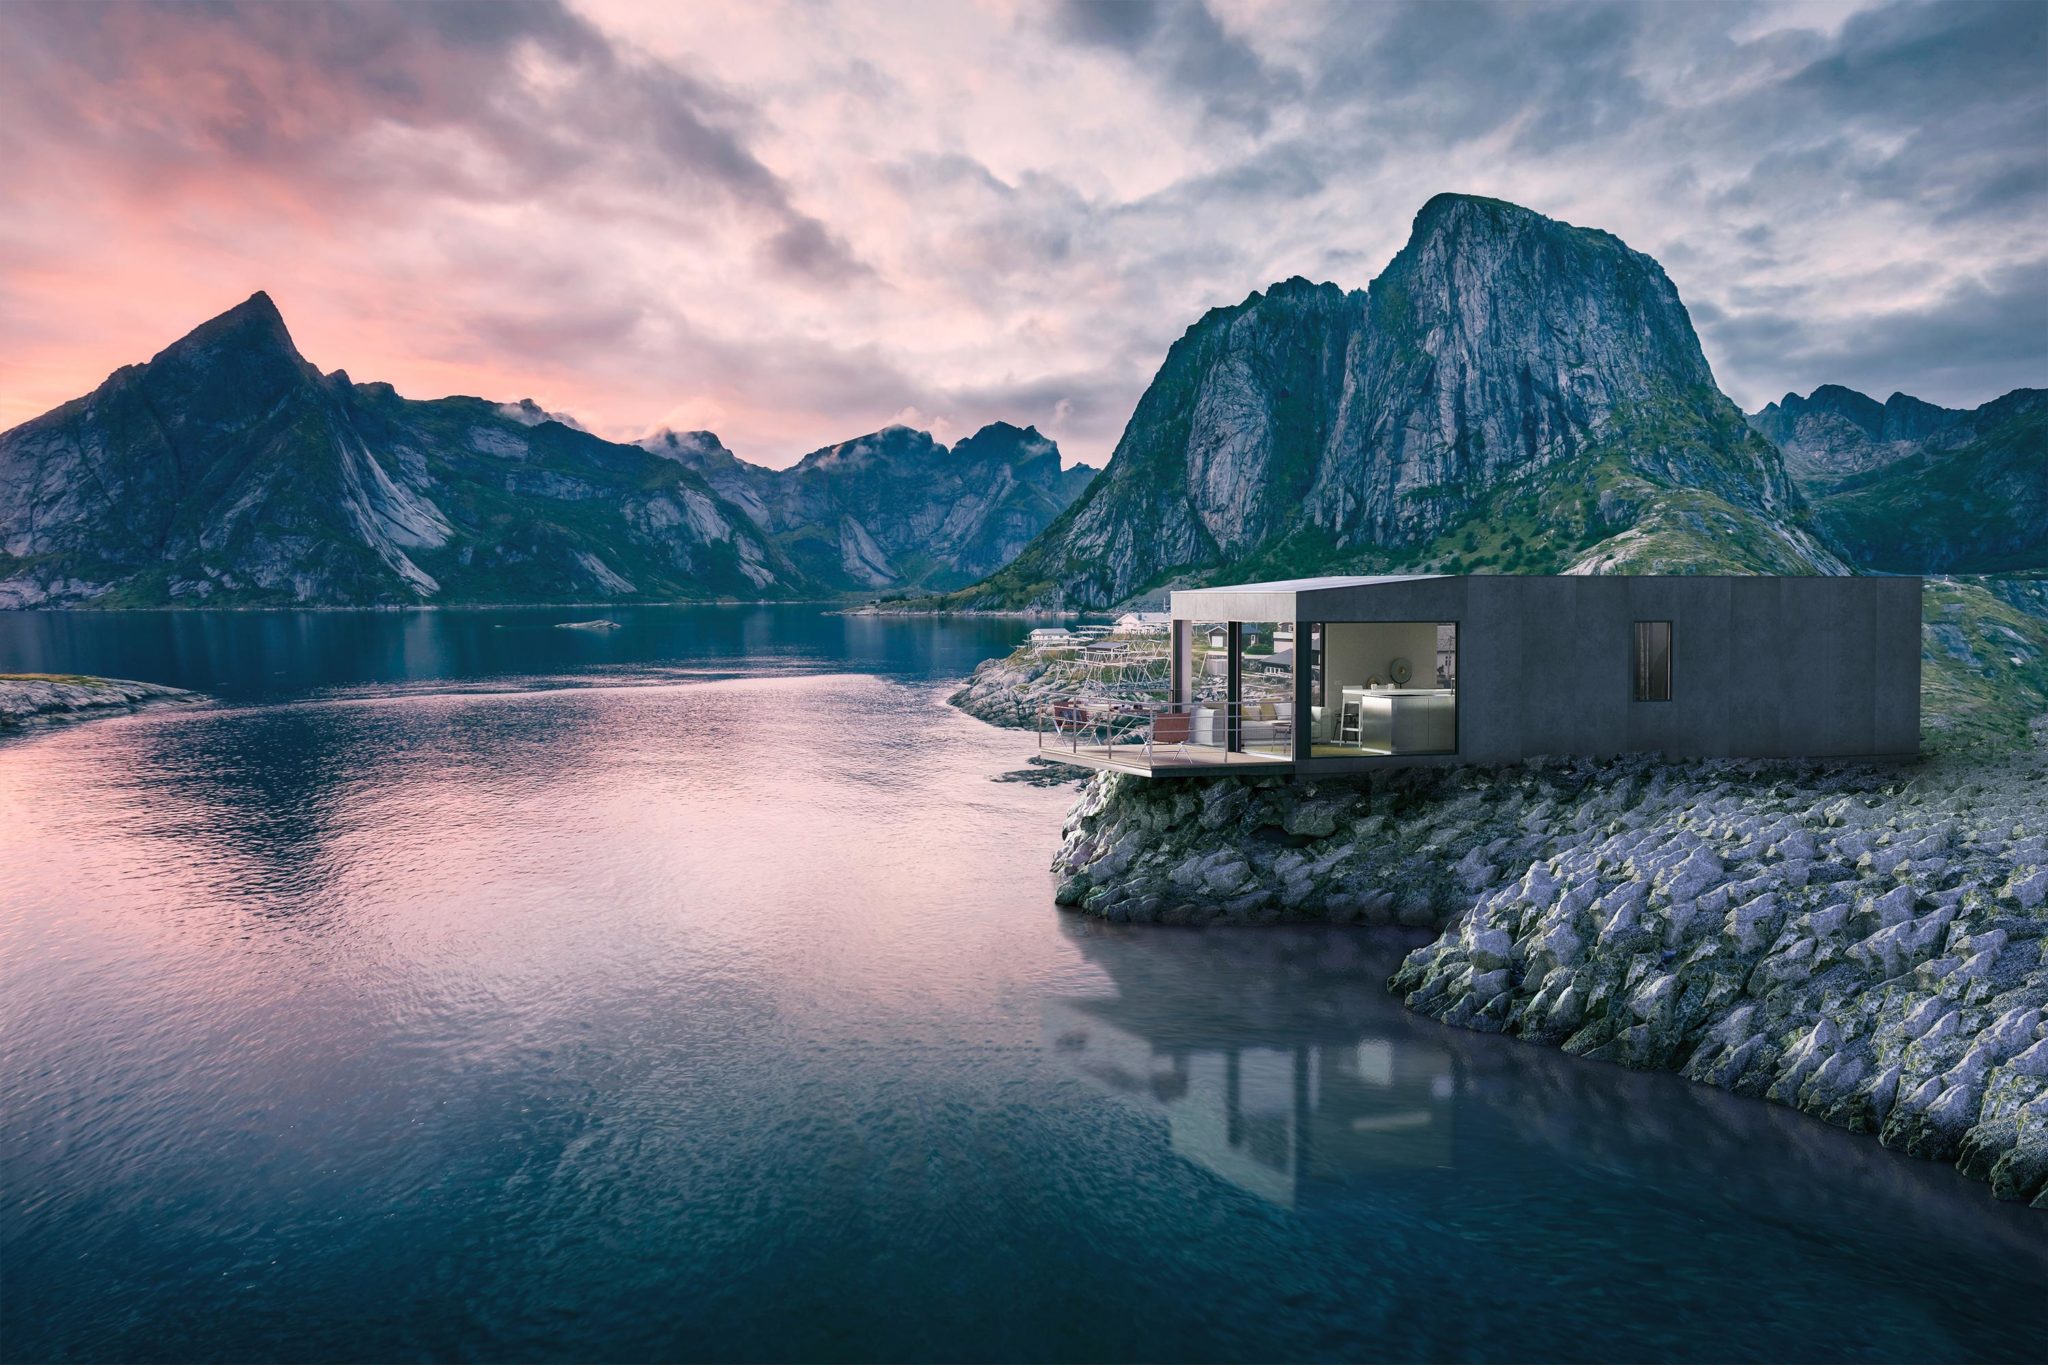 Cabin situated on a rocky slope with a terrace hovering over the water, offering a view of mountains.